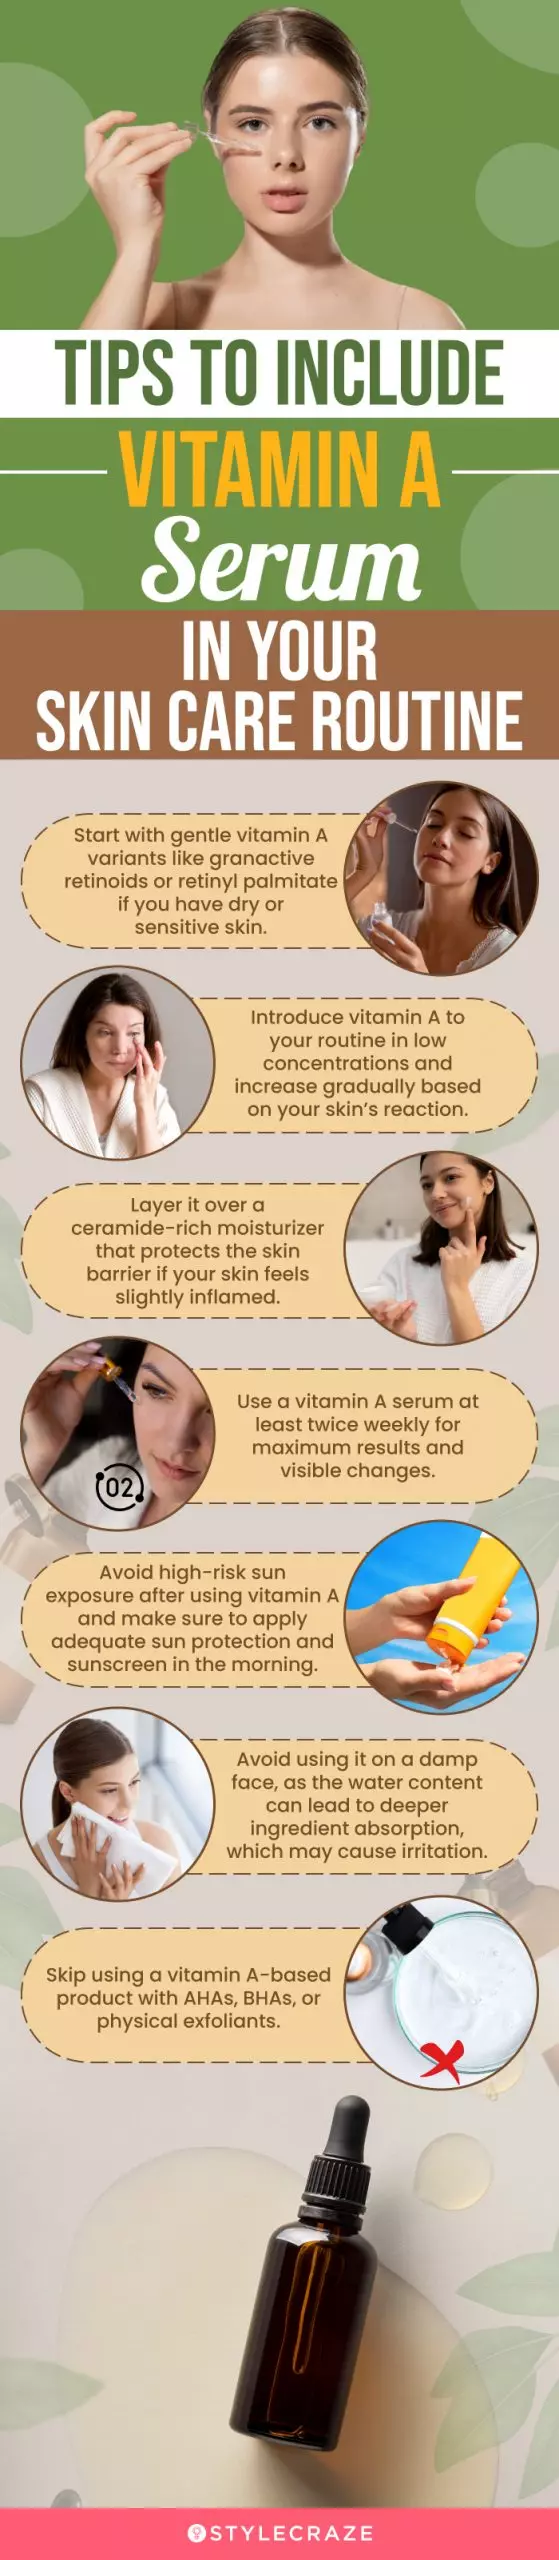 Tips To Include Vitamin A Serum In Your Skin Care Routine (infographic)